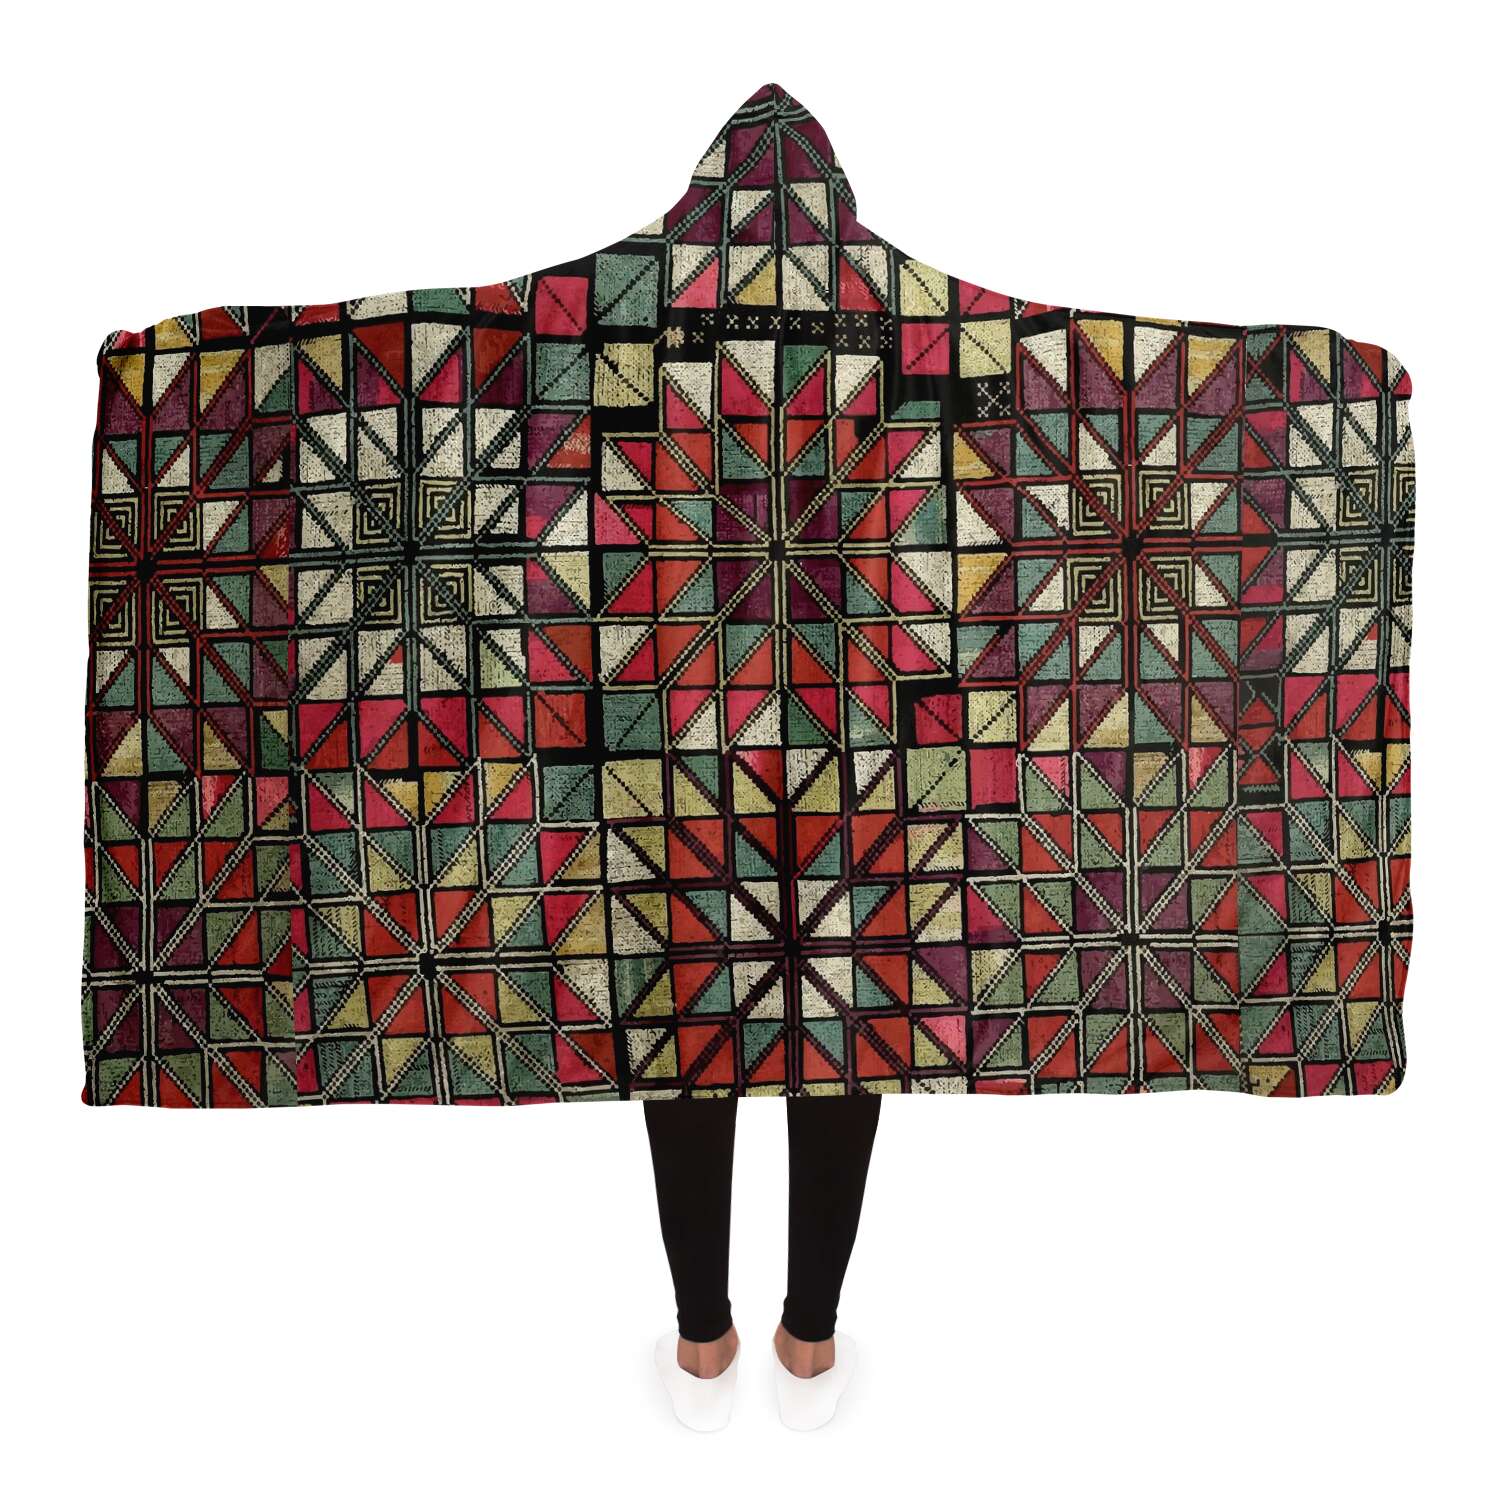 Hooded Blanket - AOP Adult / Premium Sherpa Sherpa Hooded Blanket, Miao Culture Antique, Traditional Design